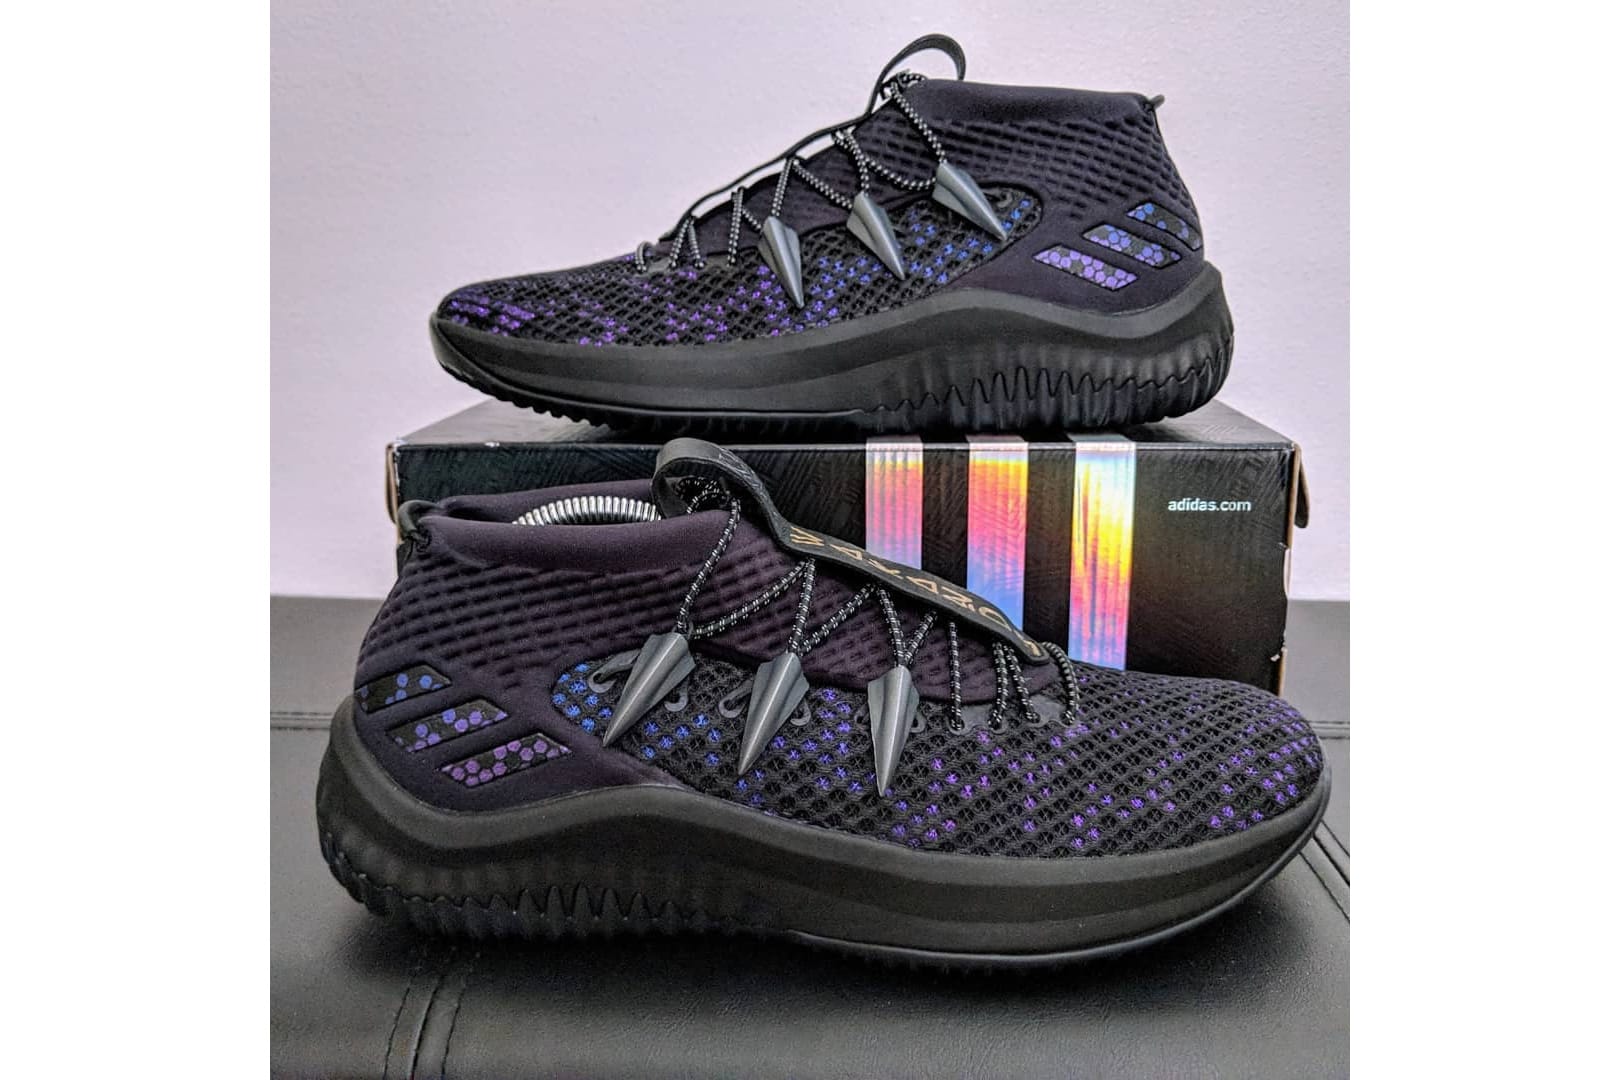 https%3A%2F%2Fhypebeast.com%2Fimage%2F2018%2F03%2Fadidas dame 4 black panther custom 00